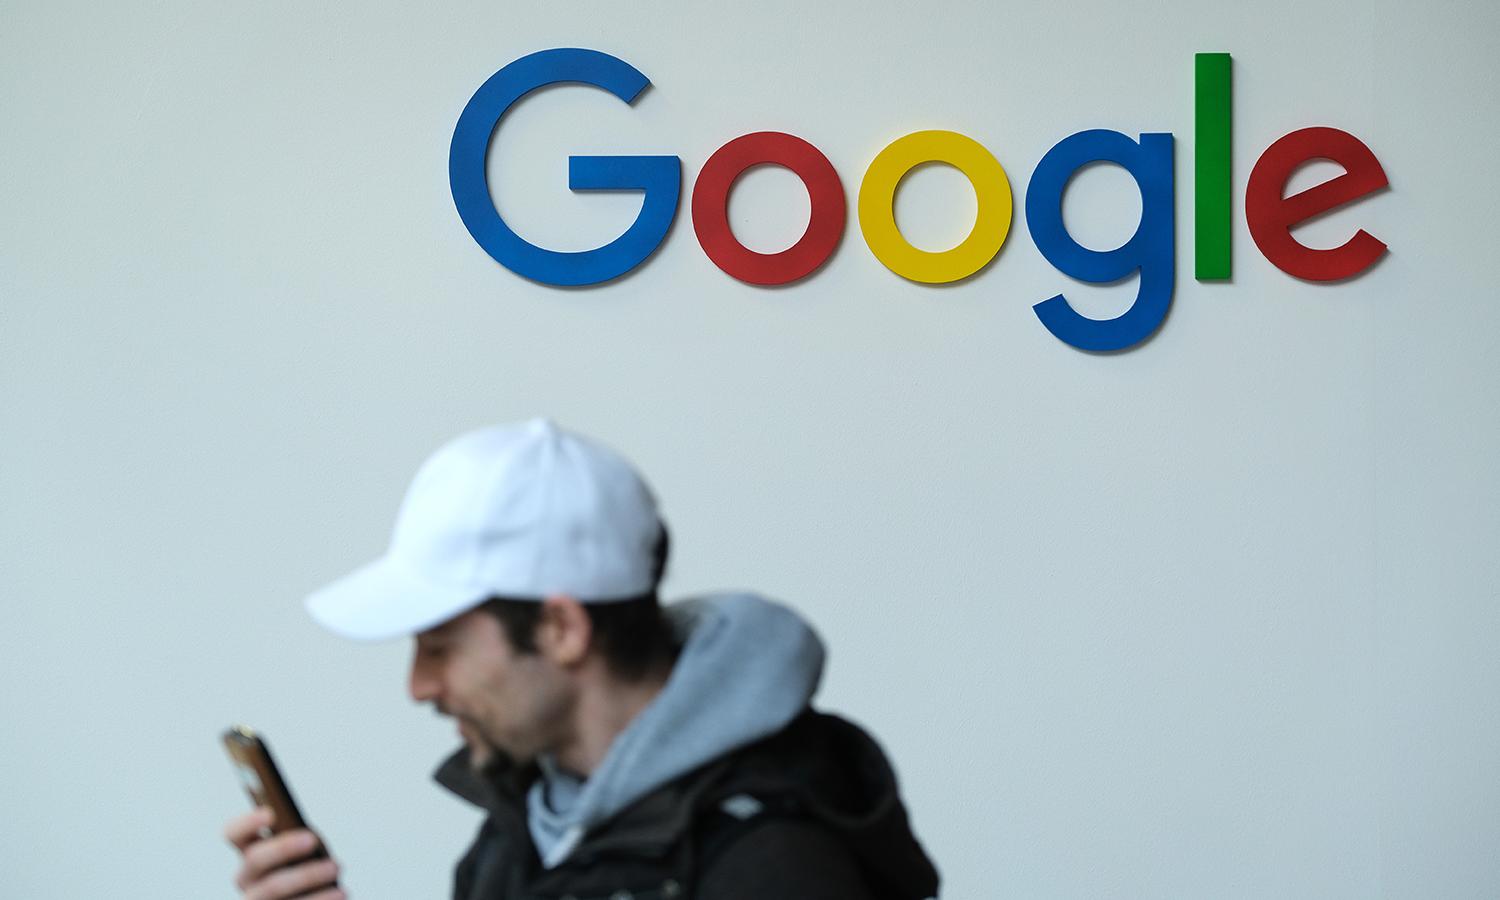 A visitor speaks into a smartphone while standing next to a Google stand on May 6, 2019, in Berlin. (Photo by Sean Gallup/Getty Images)